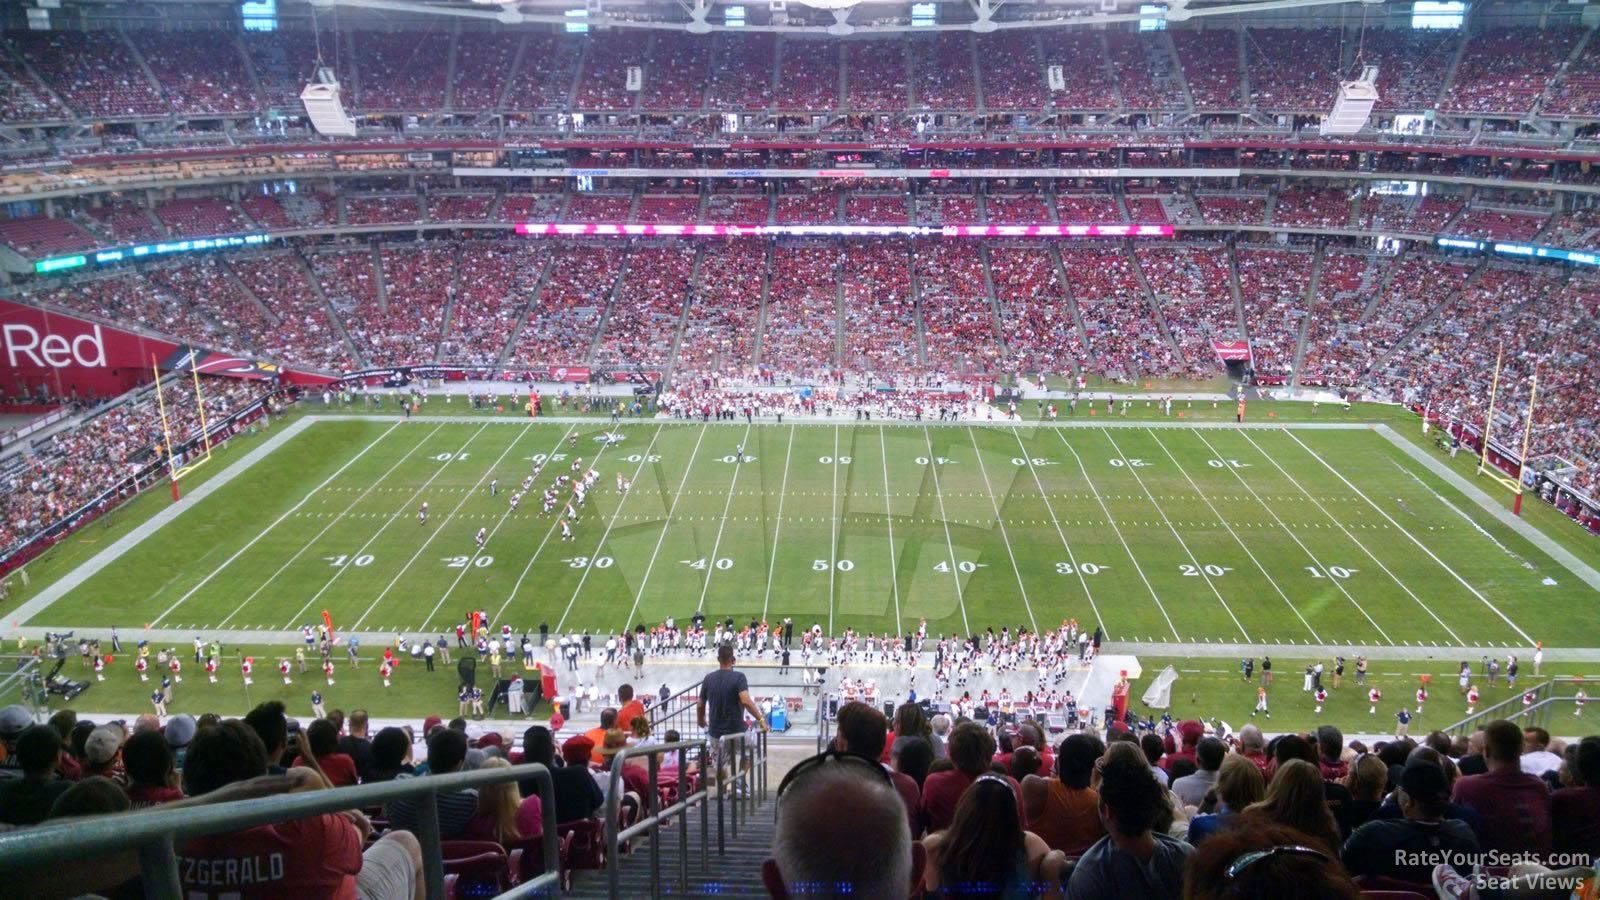 section 443, row 15 seat view  for football - state farm stadium